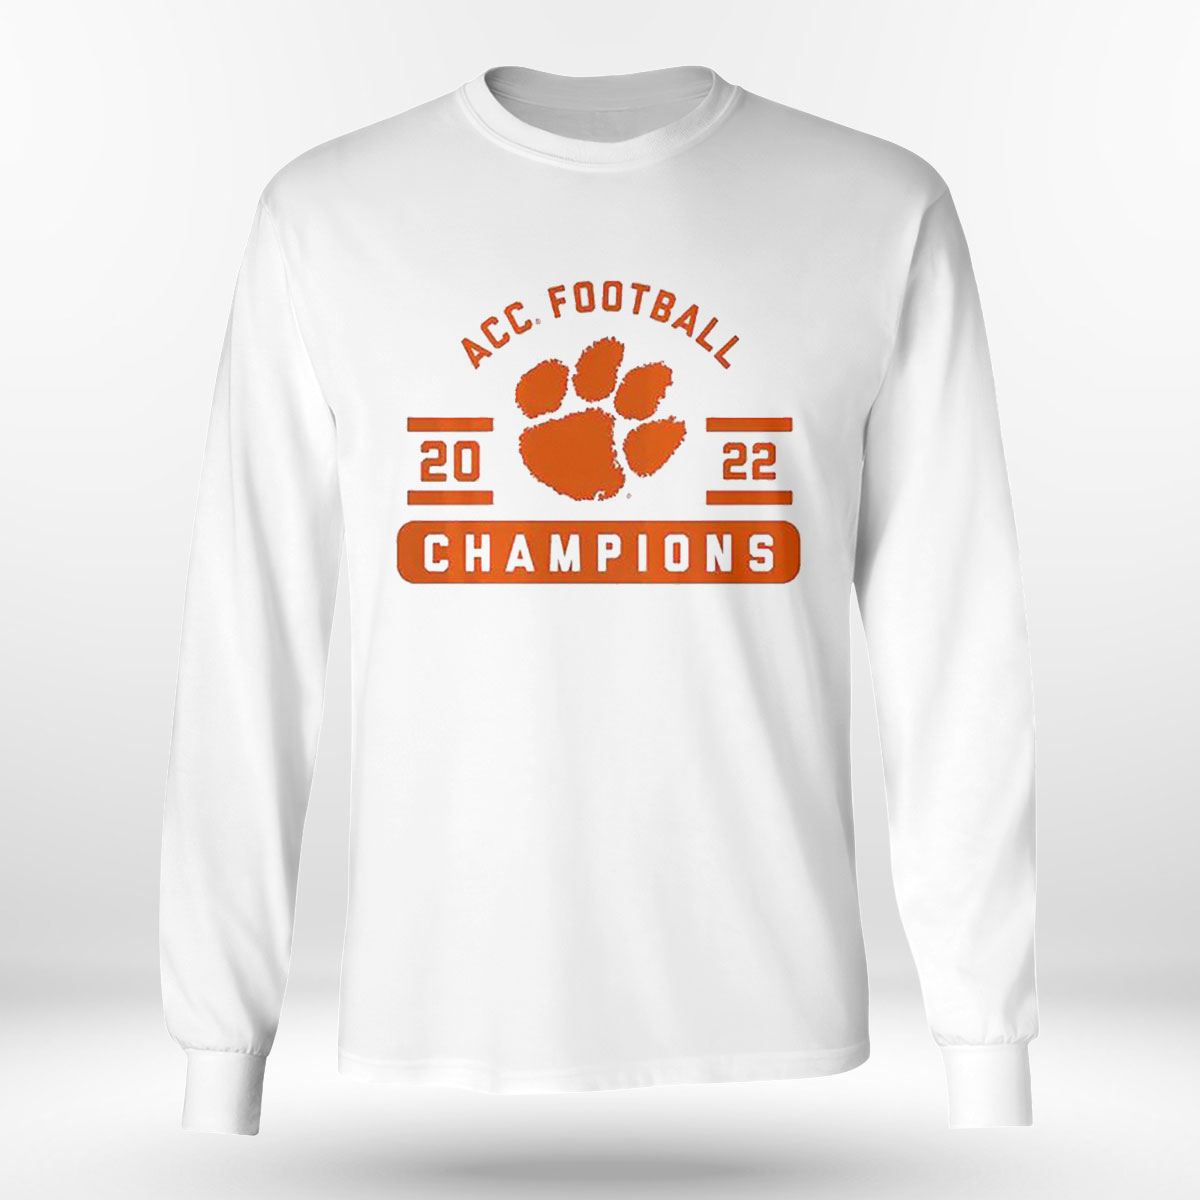 Clemson Tigers Champions Acc Football Conference 2022 Shirt Hoodie